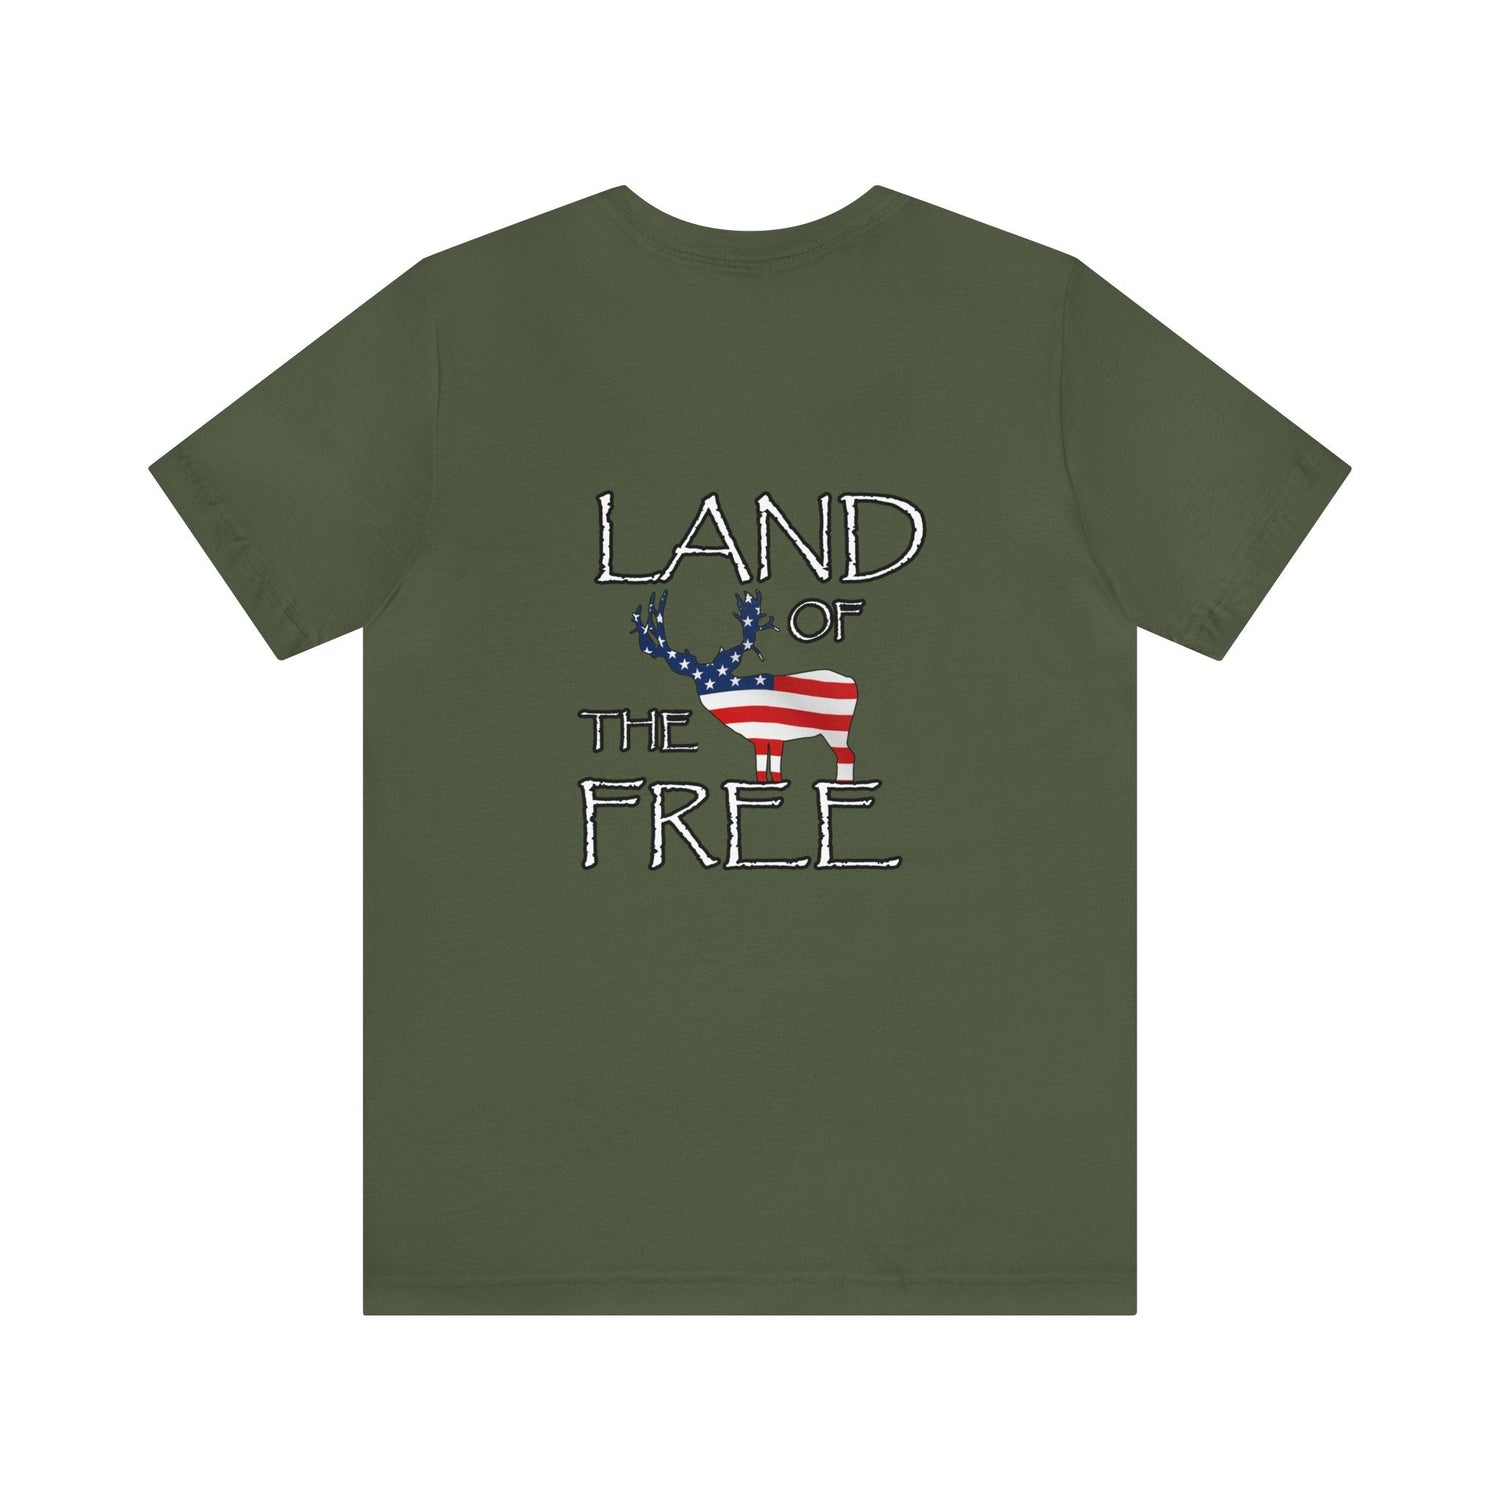 Western deer hunting t-shirt, color military green, front design placement